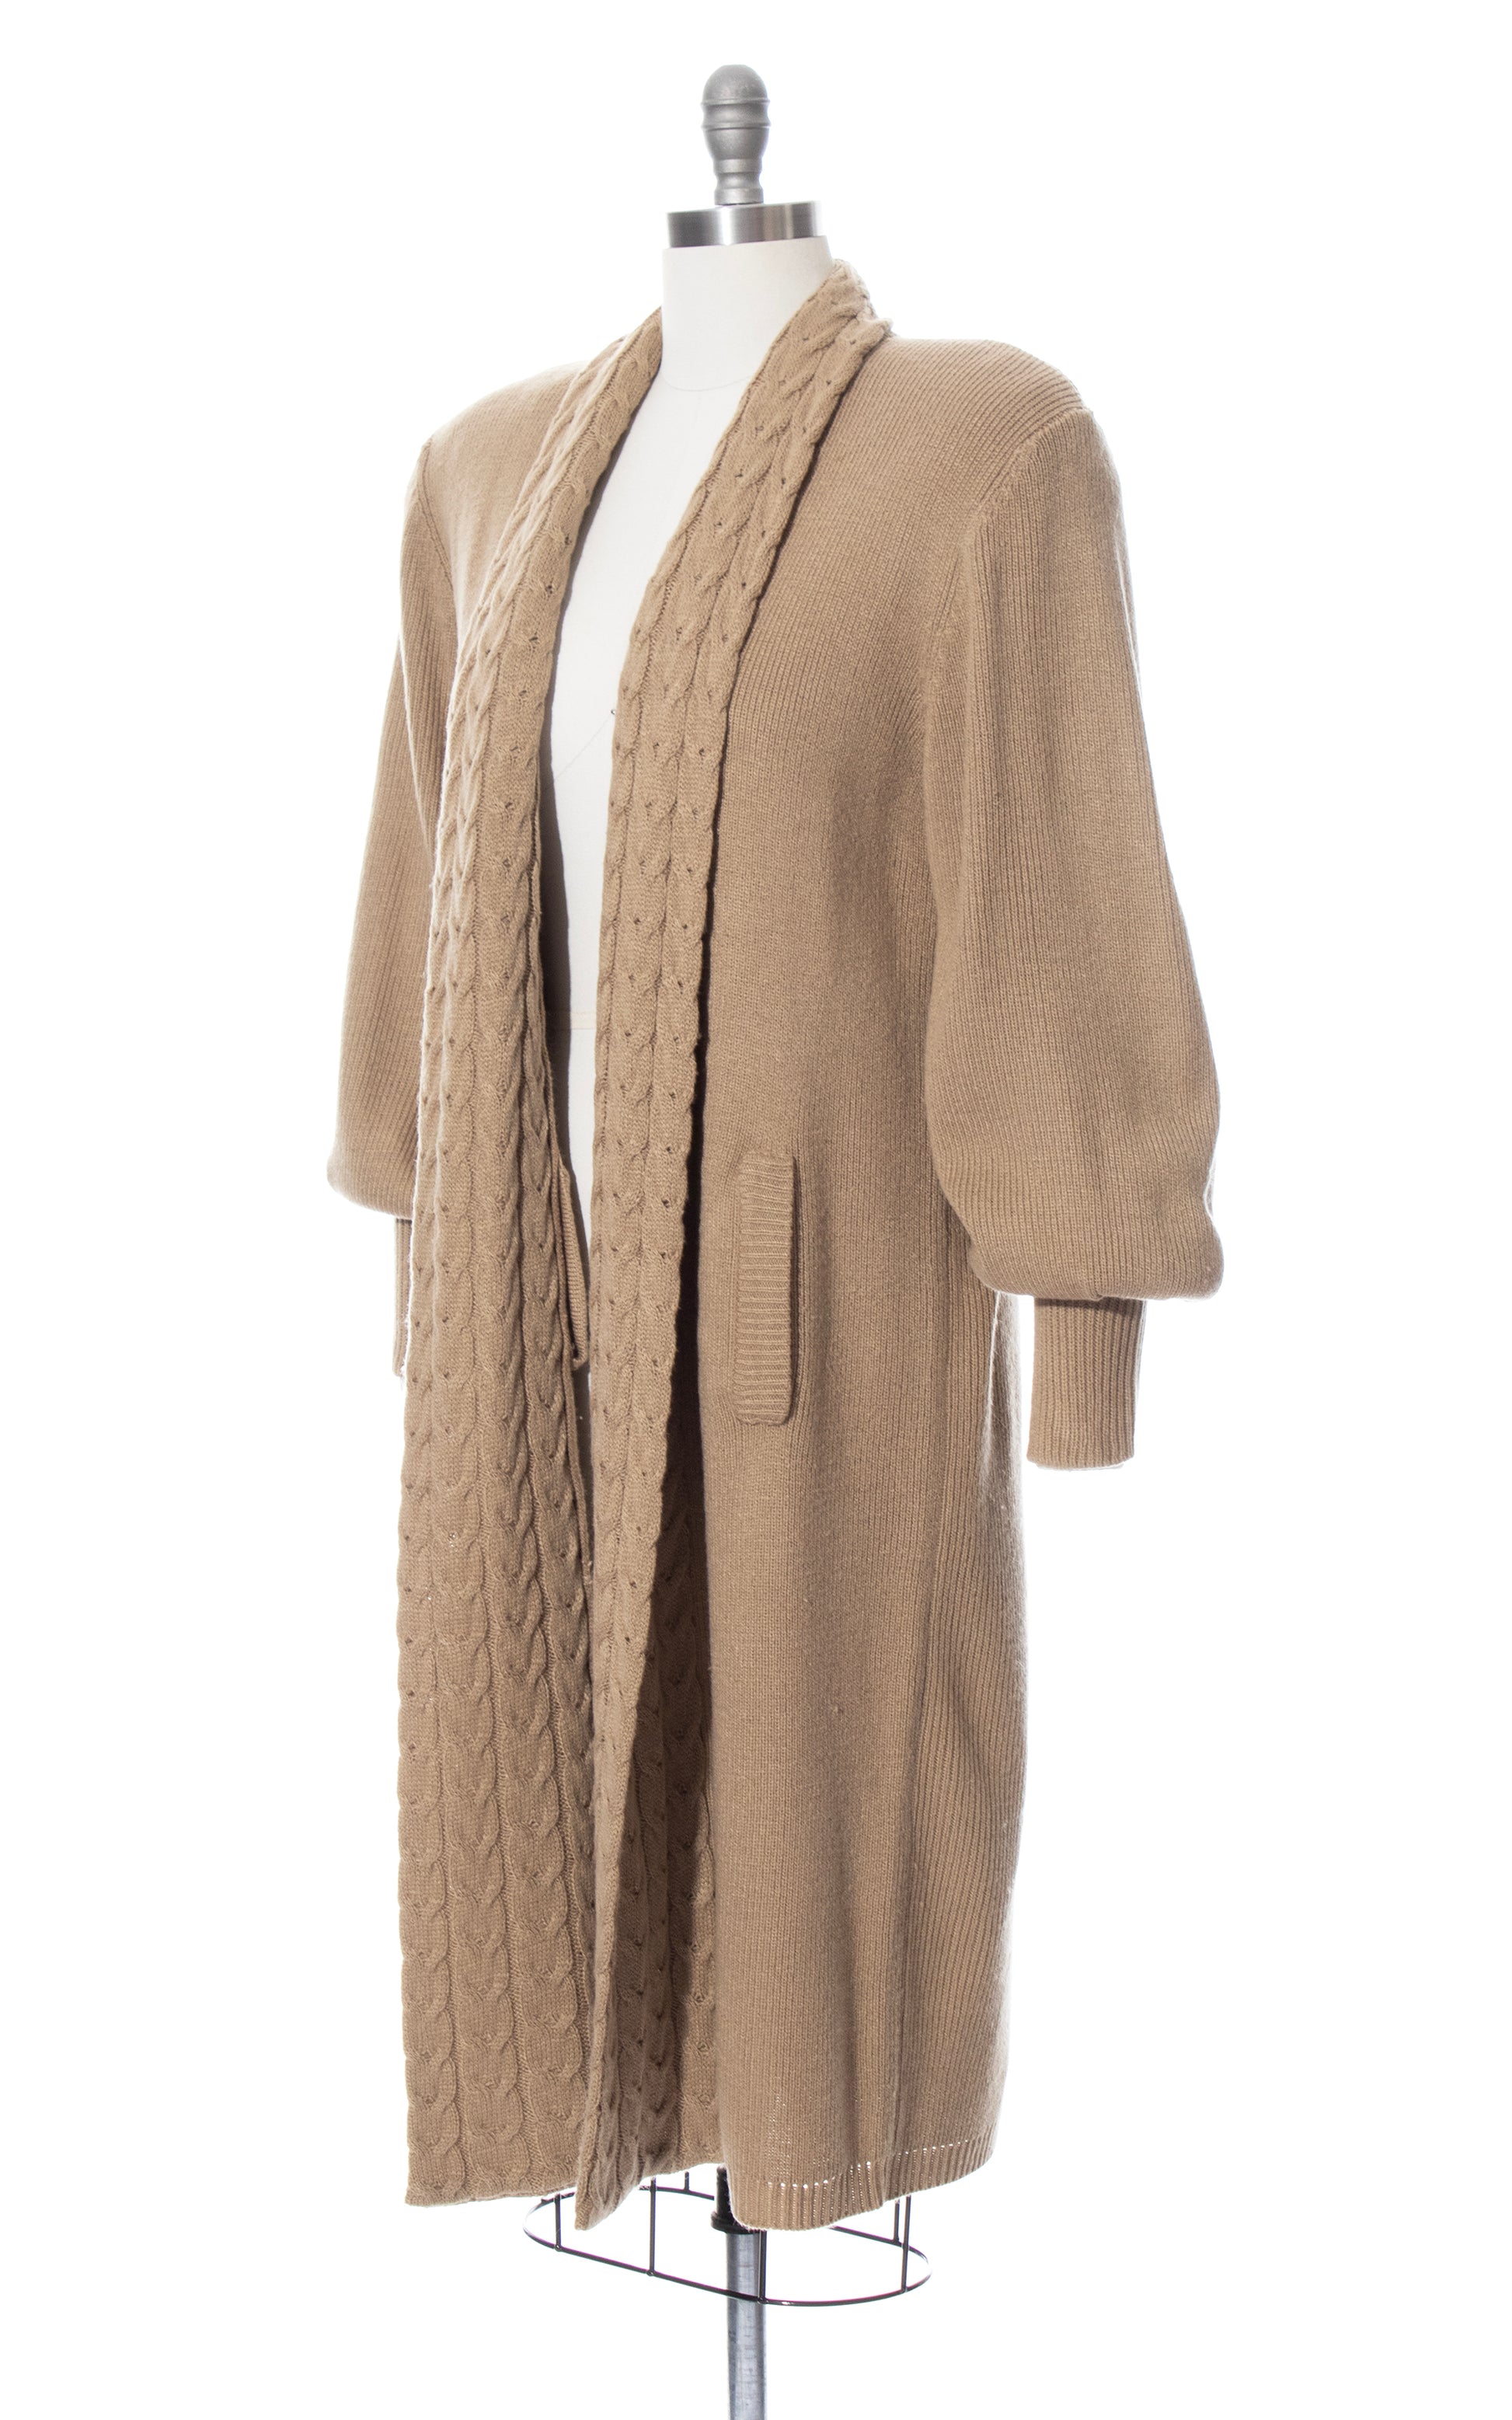 Vintage 80s 1980s Knit Acrylic Long Tan Brown Sweater Coat BirthdayLifeVintage